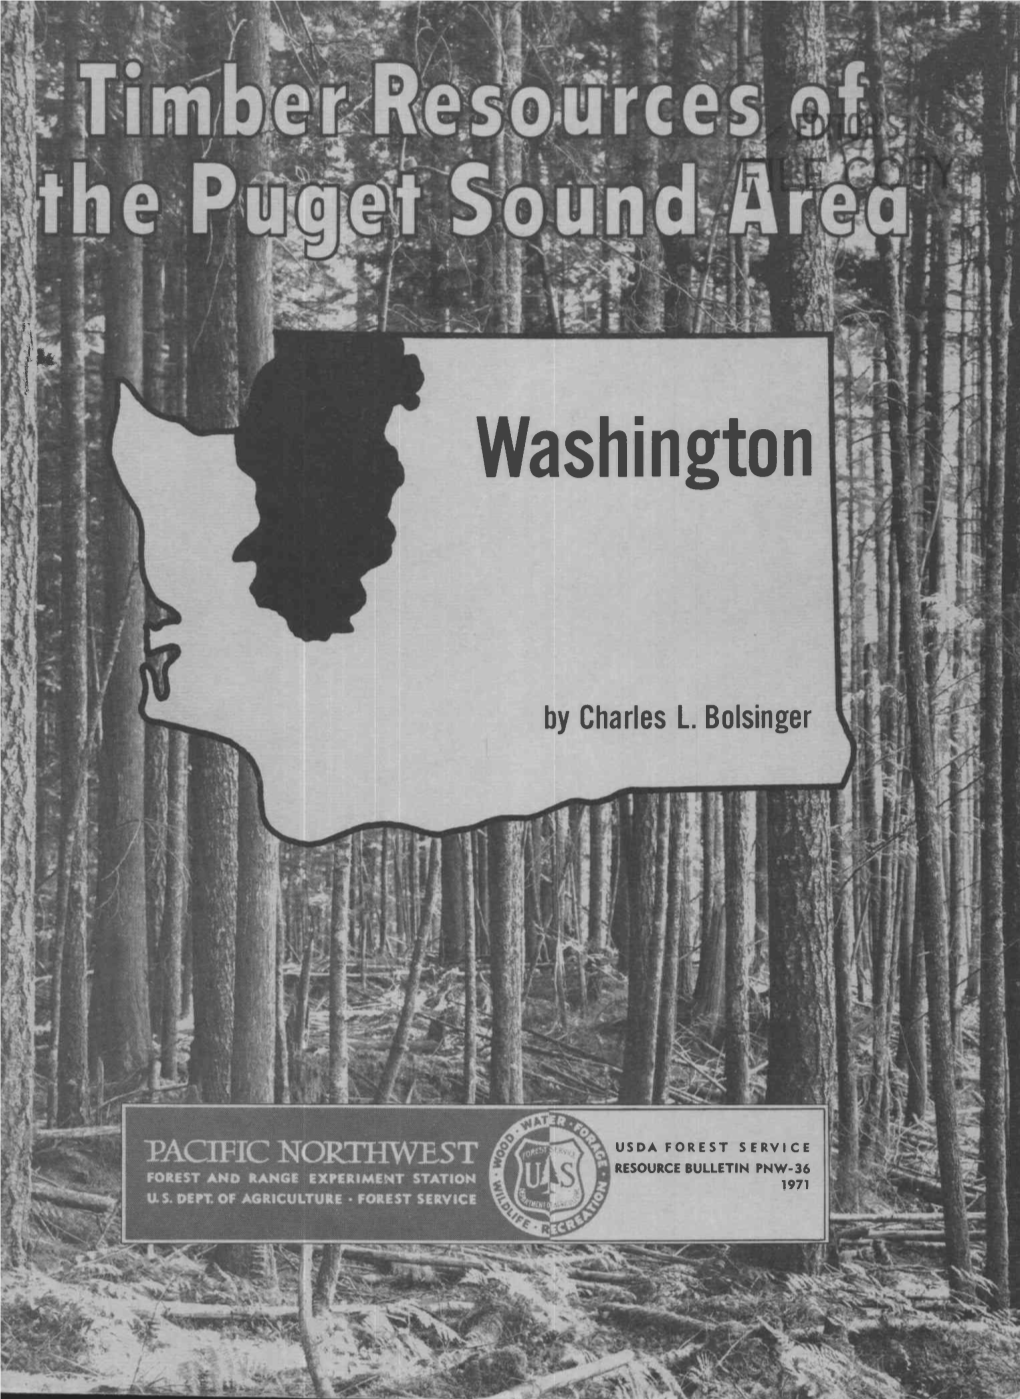 Timber Resources of the Puget Sound Area, Washington